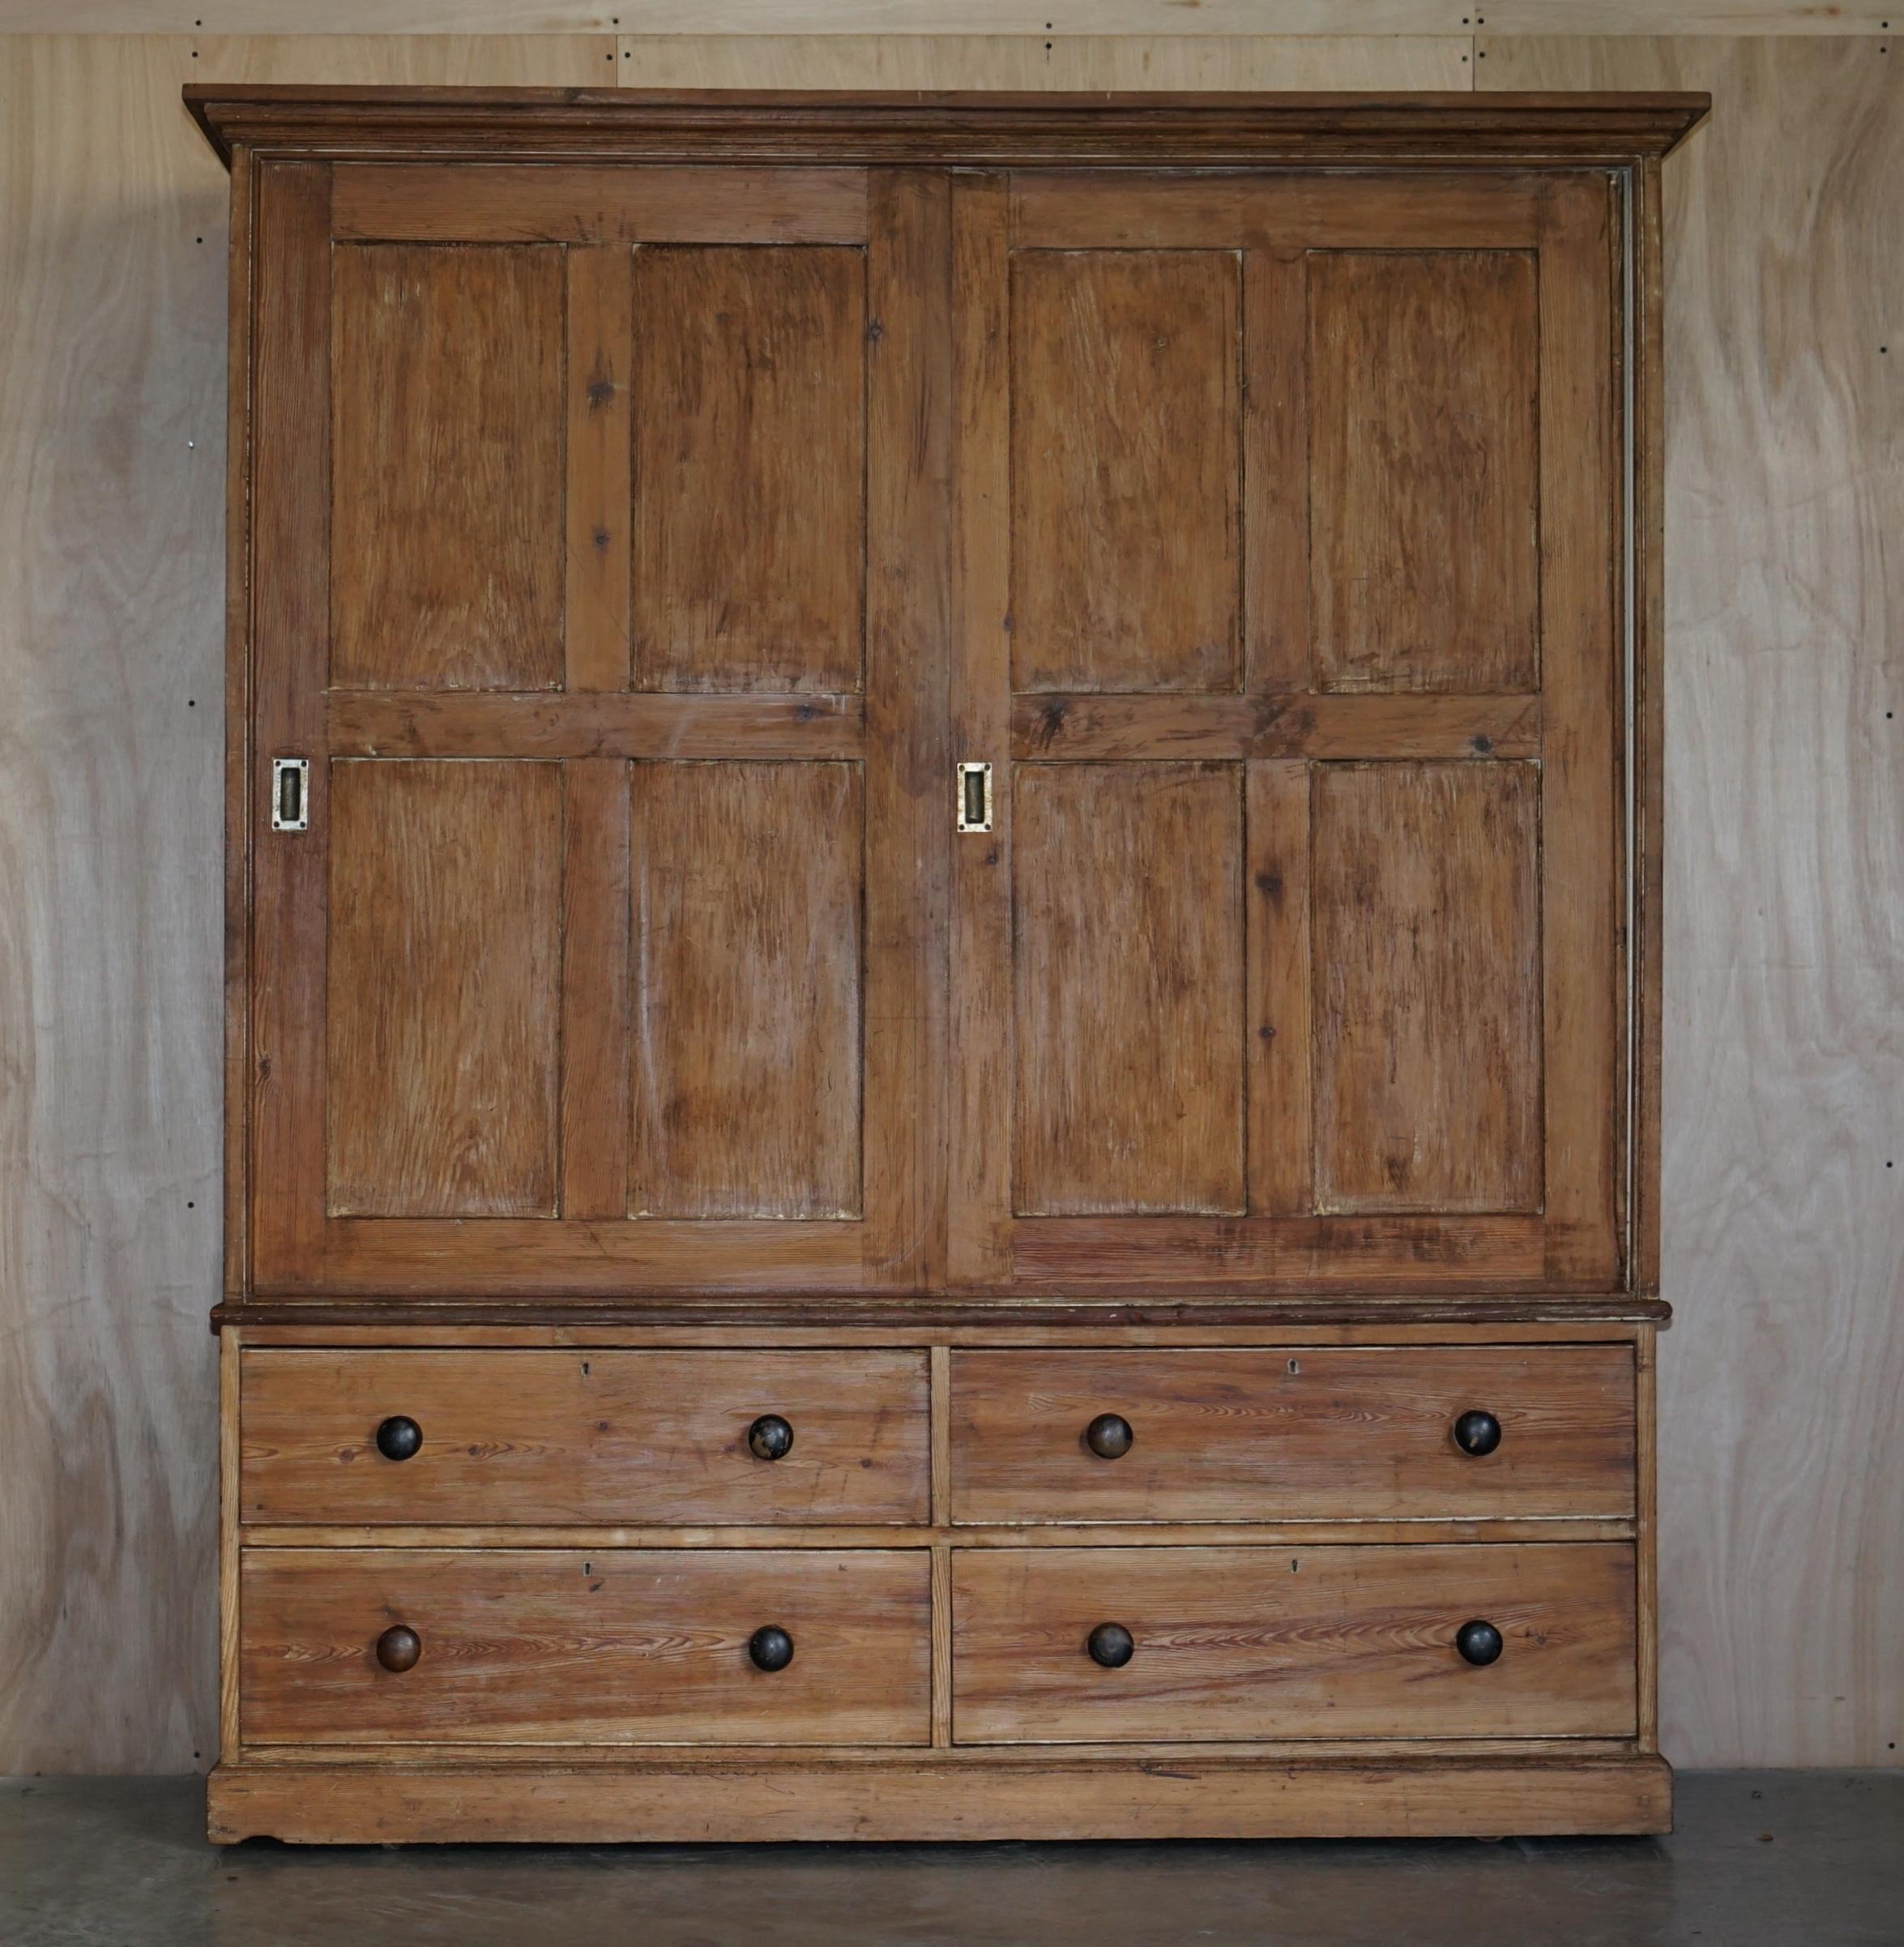 We are delighted to offer for sale this stunning highly collectable Victorian pine housekeepers cupboard for linens or pots

A very charming and highly collectable piece, this is one of the larger examples I have come across, it has huge amounts